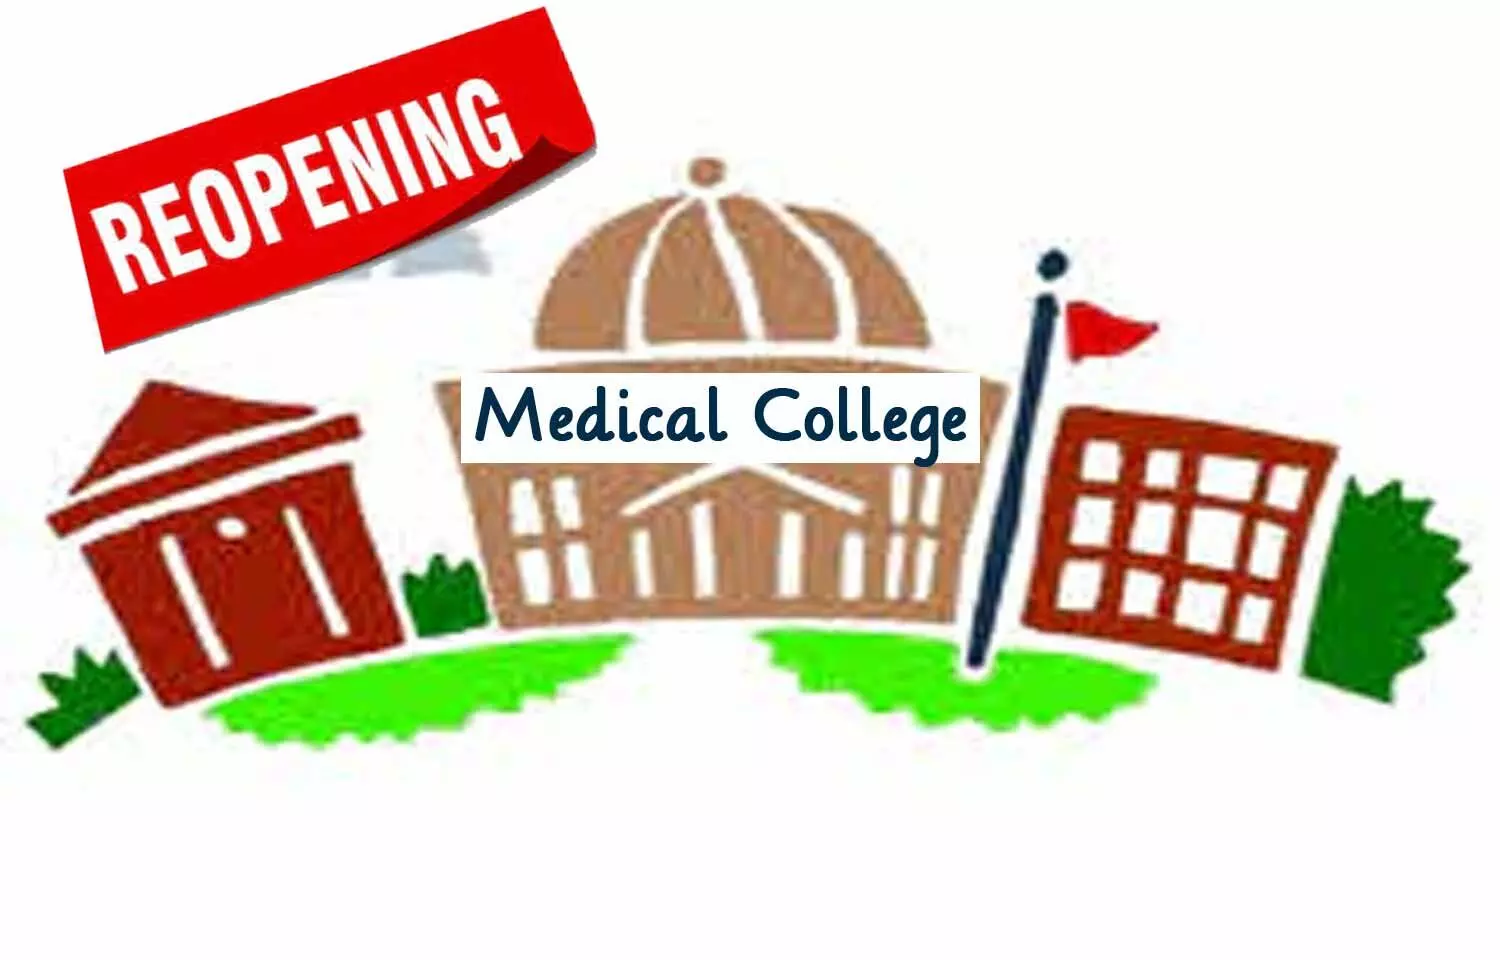 Himachal: All medical colleges to reopen from December 1 with conditions of SOPs